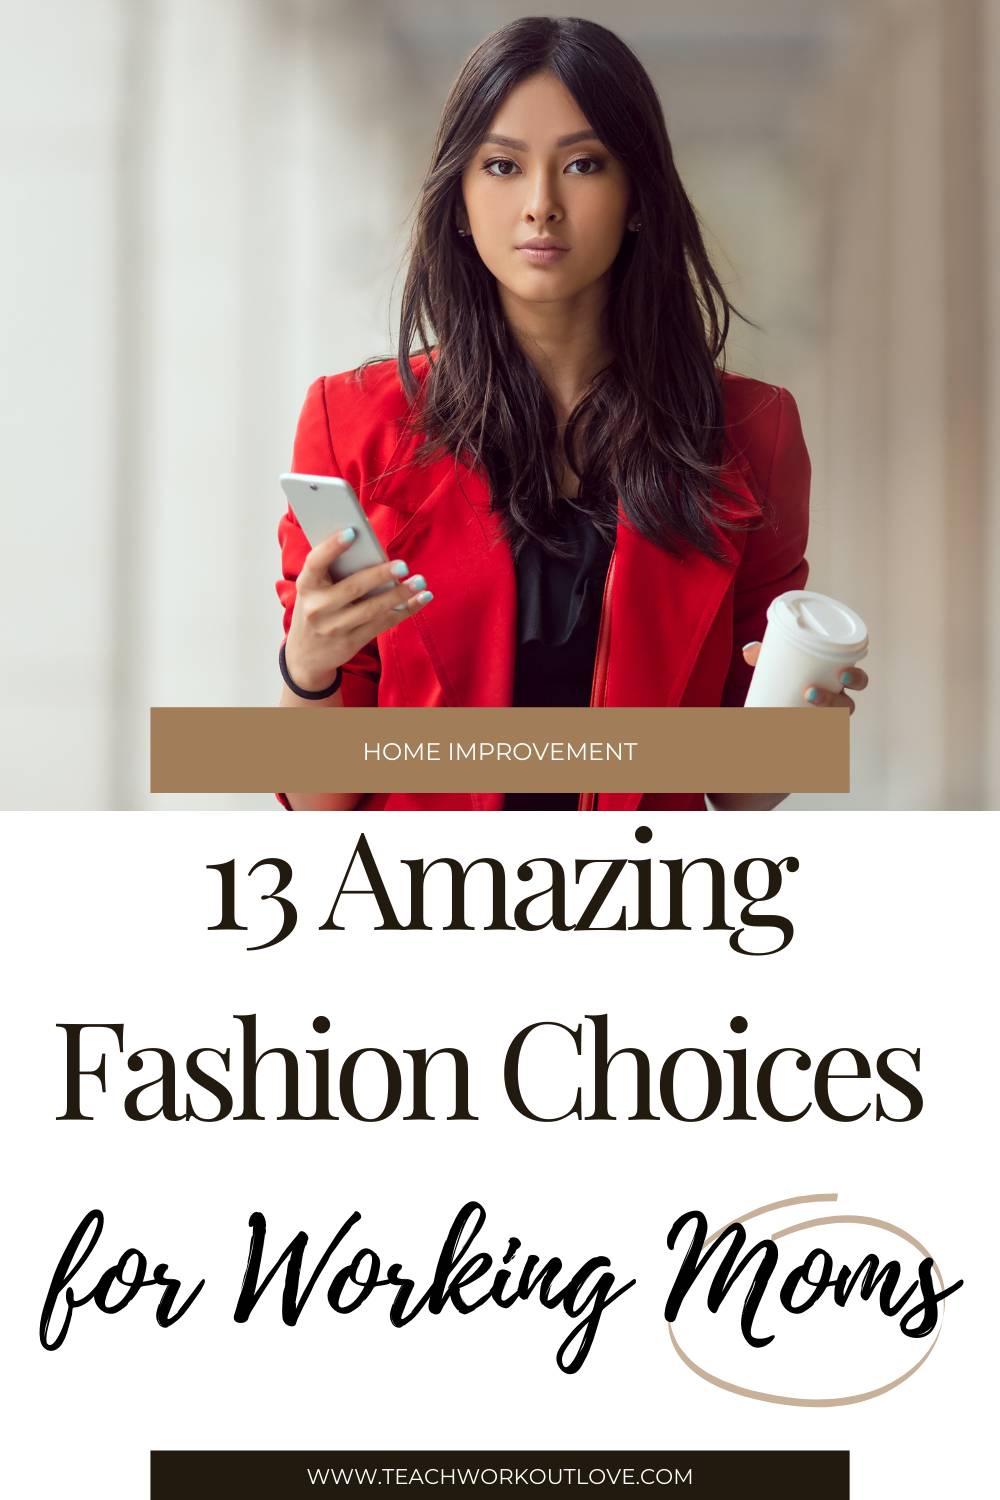 Teach.Workout.Love is a community for working moms. Read this blog to know the stylish and comfy 13 amazing fashion choices for working mom.